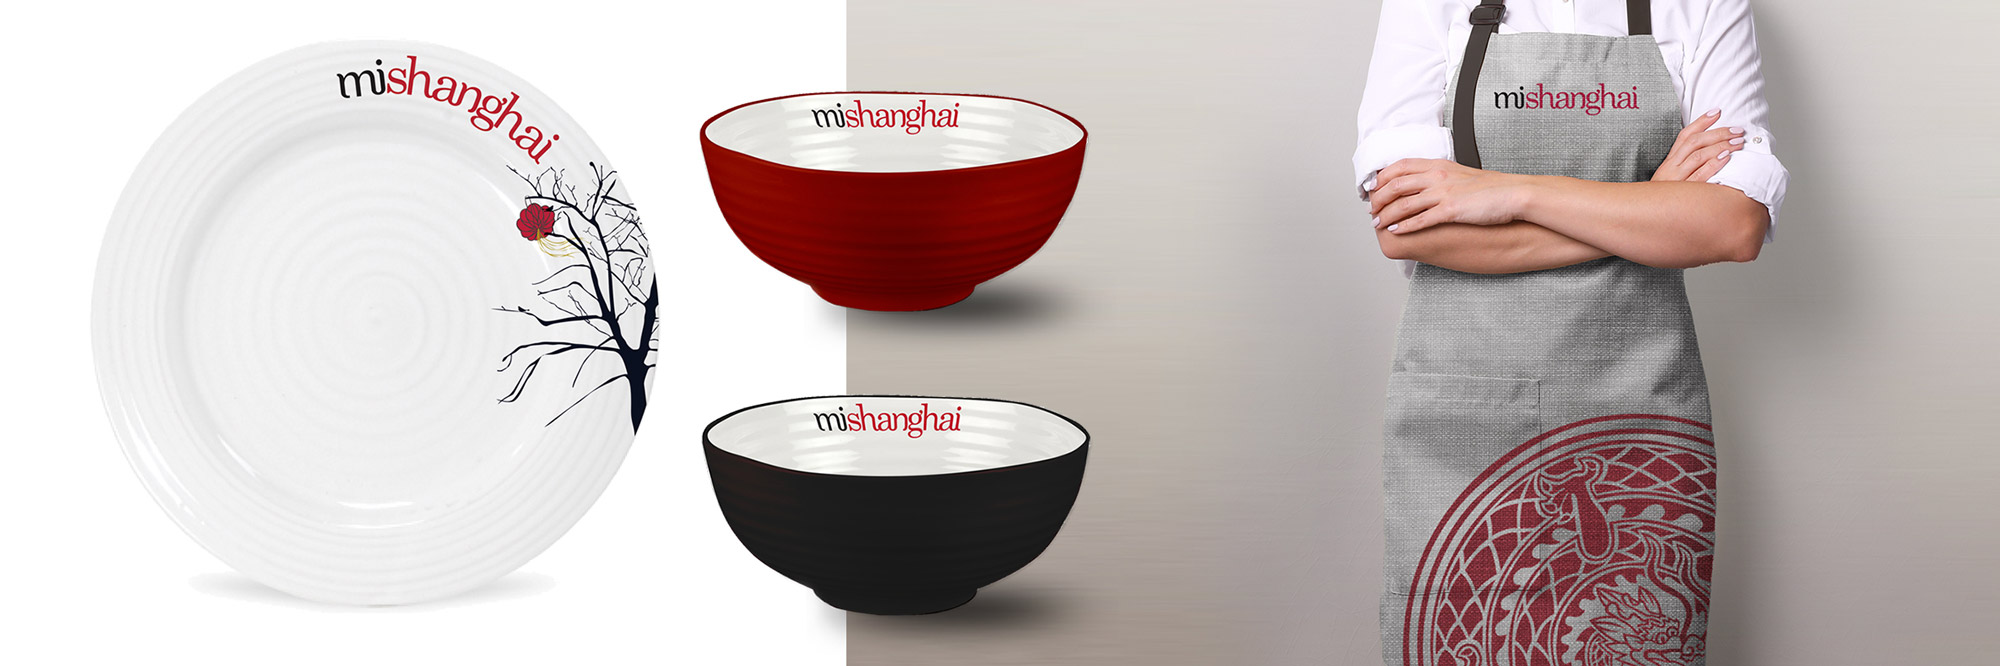 Logo design applied to restaurant and takeaway plates bowls and uniform design with branding and logo applied to apron